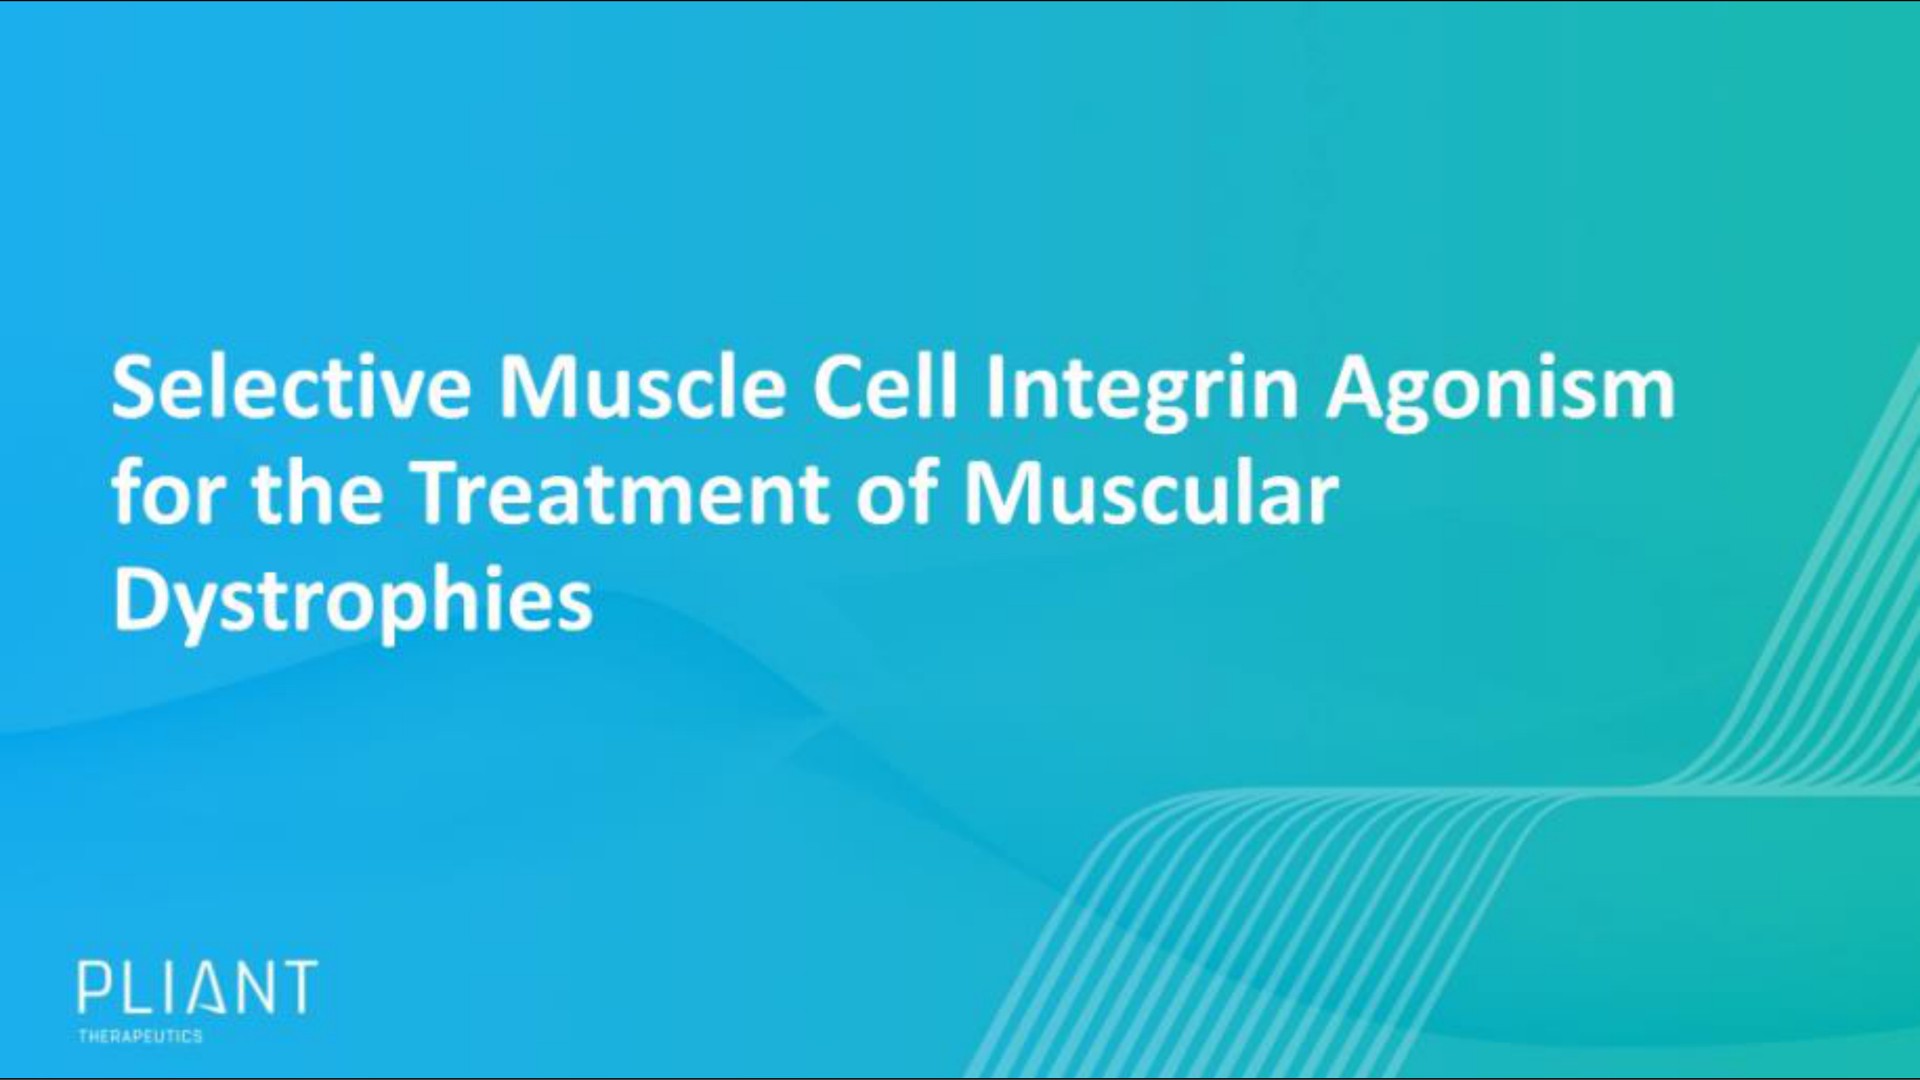 selective muscle cell for the treatment of muscular dystrophies | Pilant Therapeutics